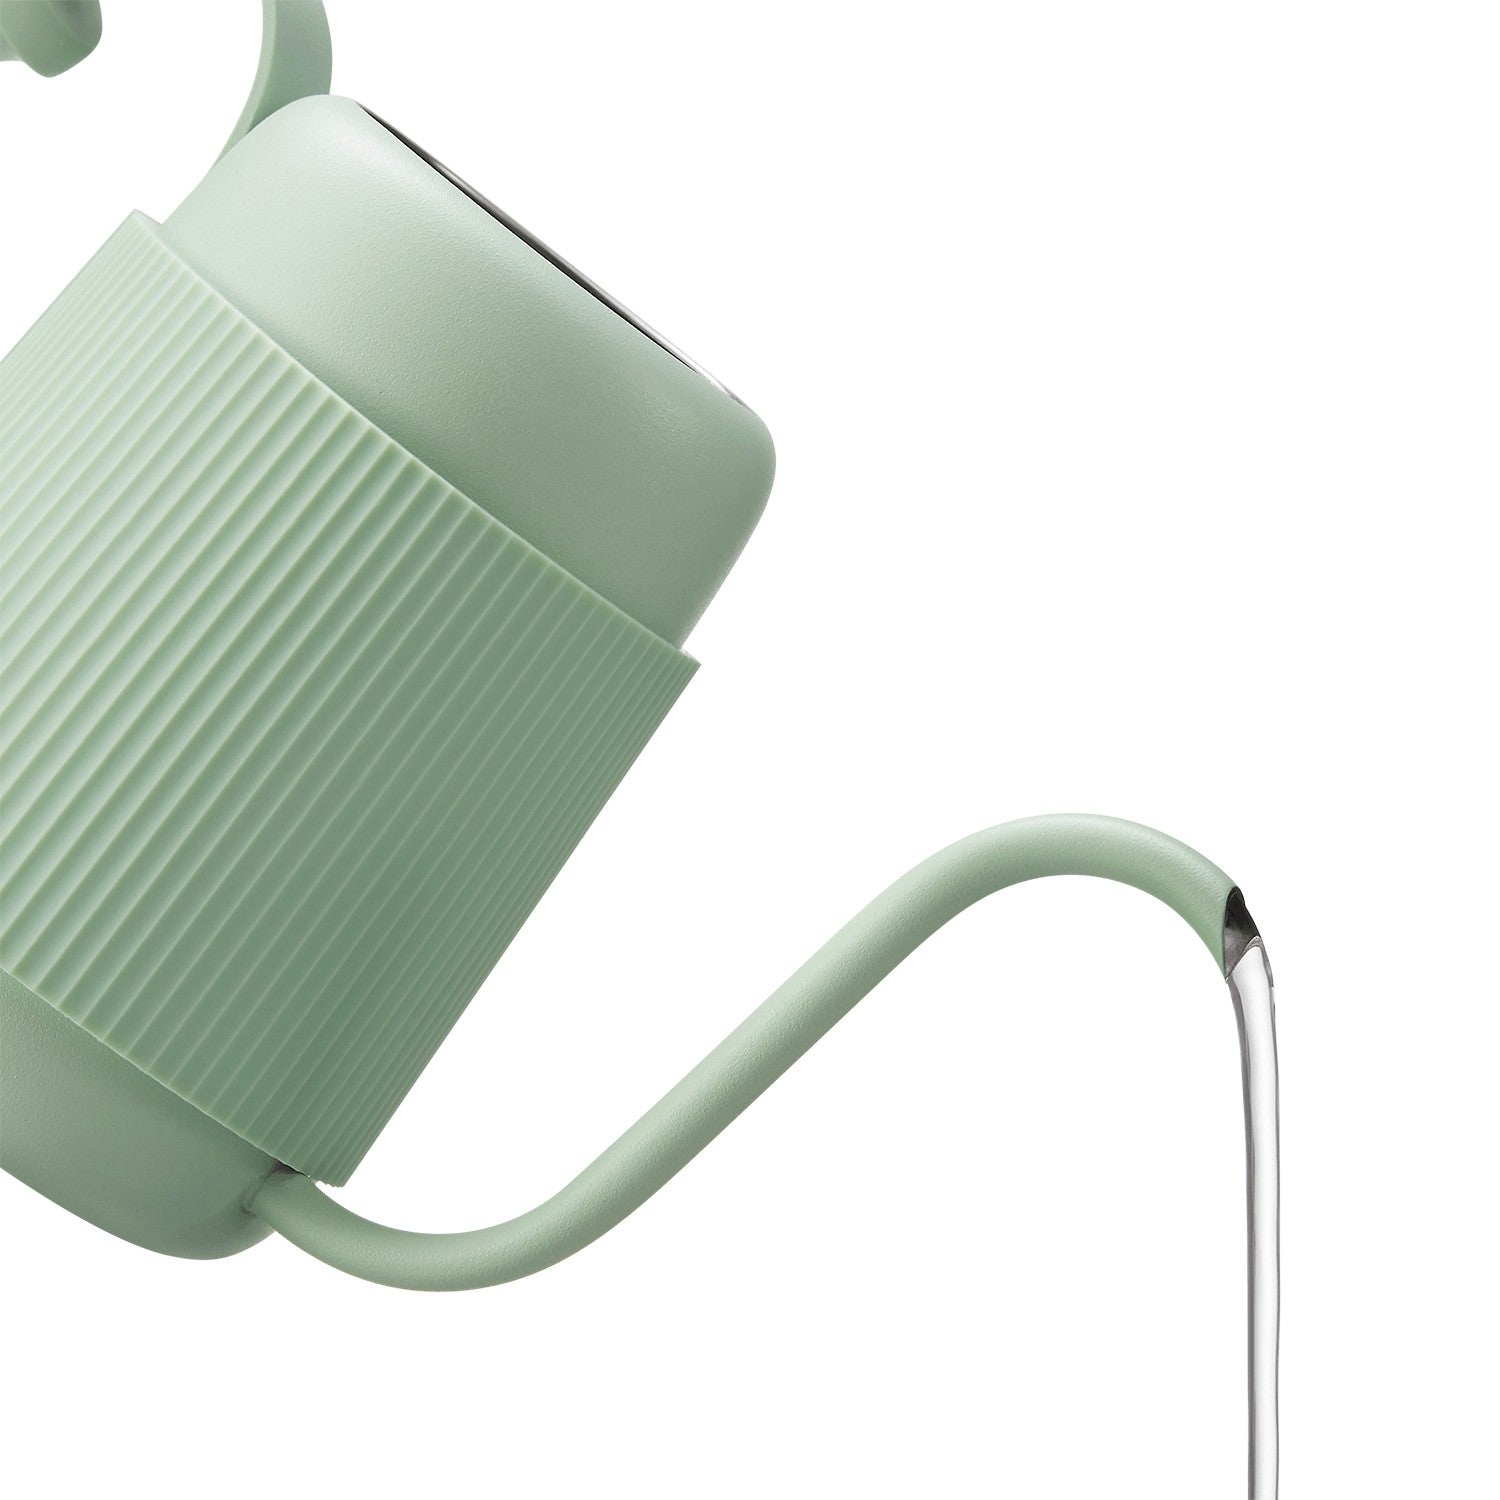 Dmofwhi Electric Kettle: $30 for Tea and Coffee, Over 40% Off